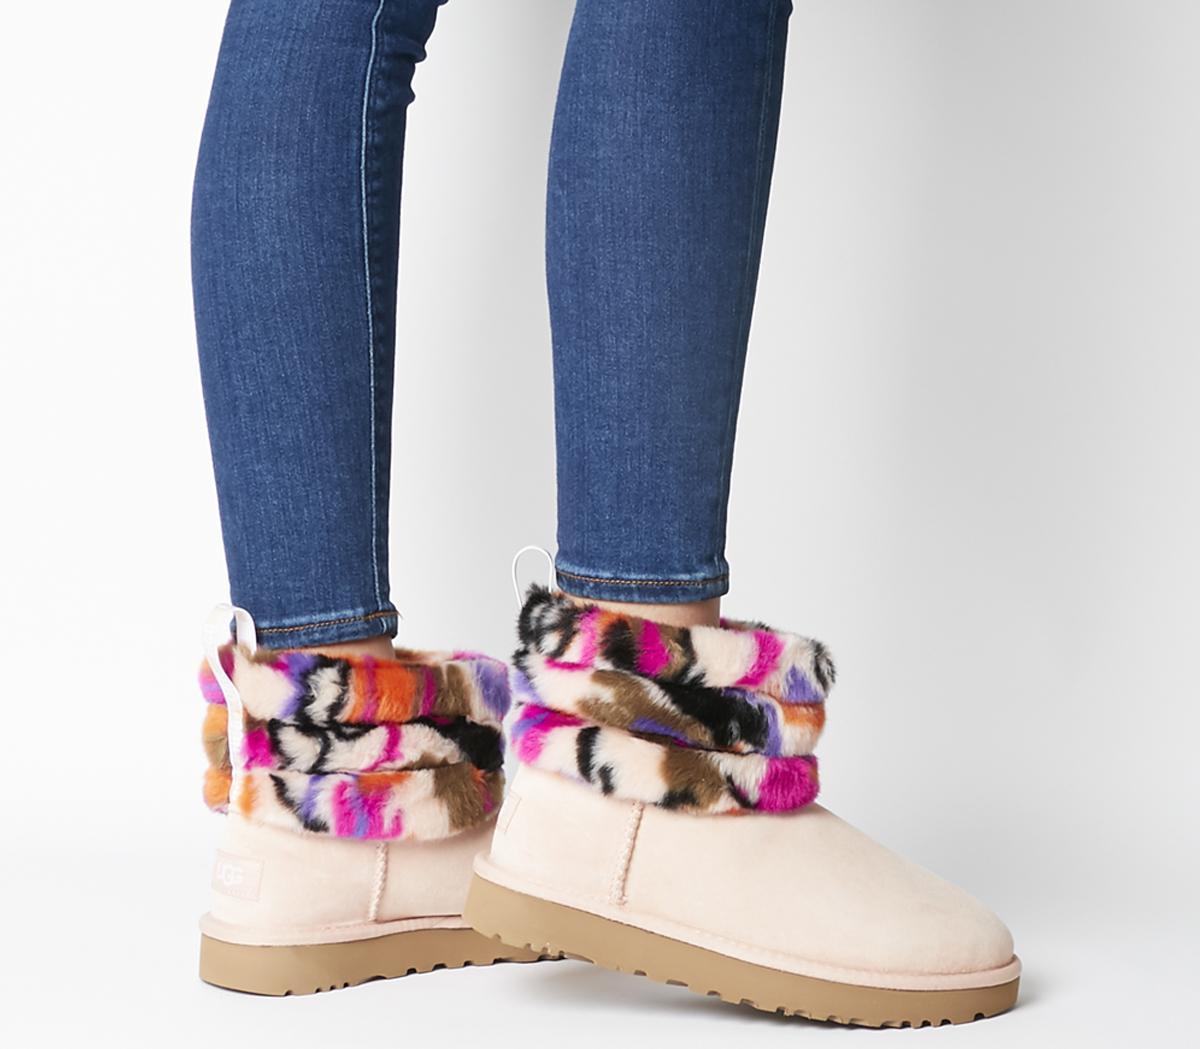 mini quilted ugg boots